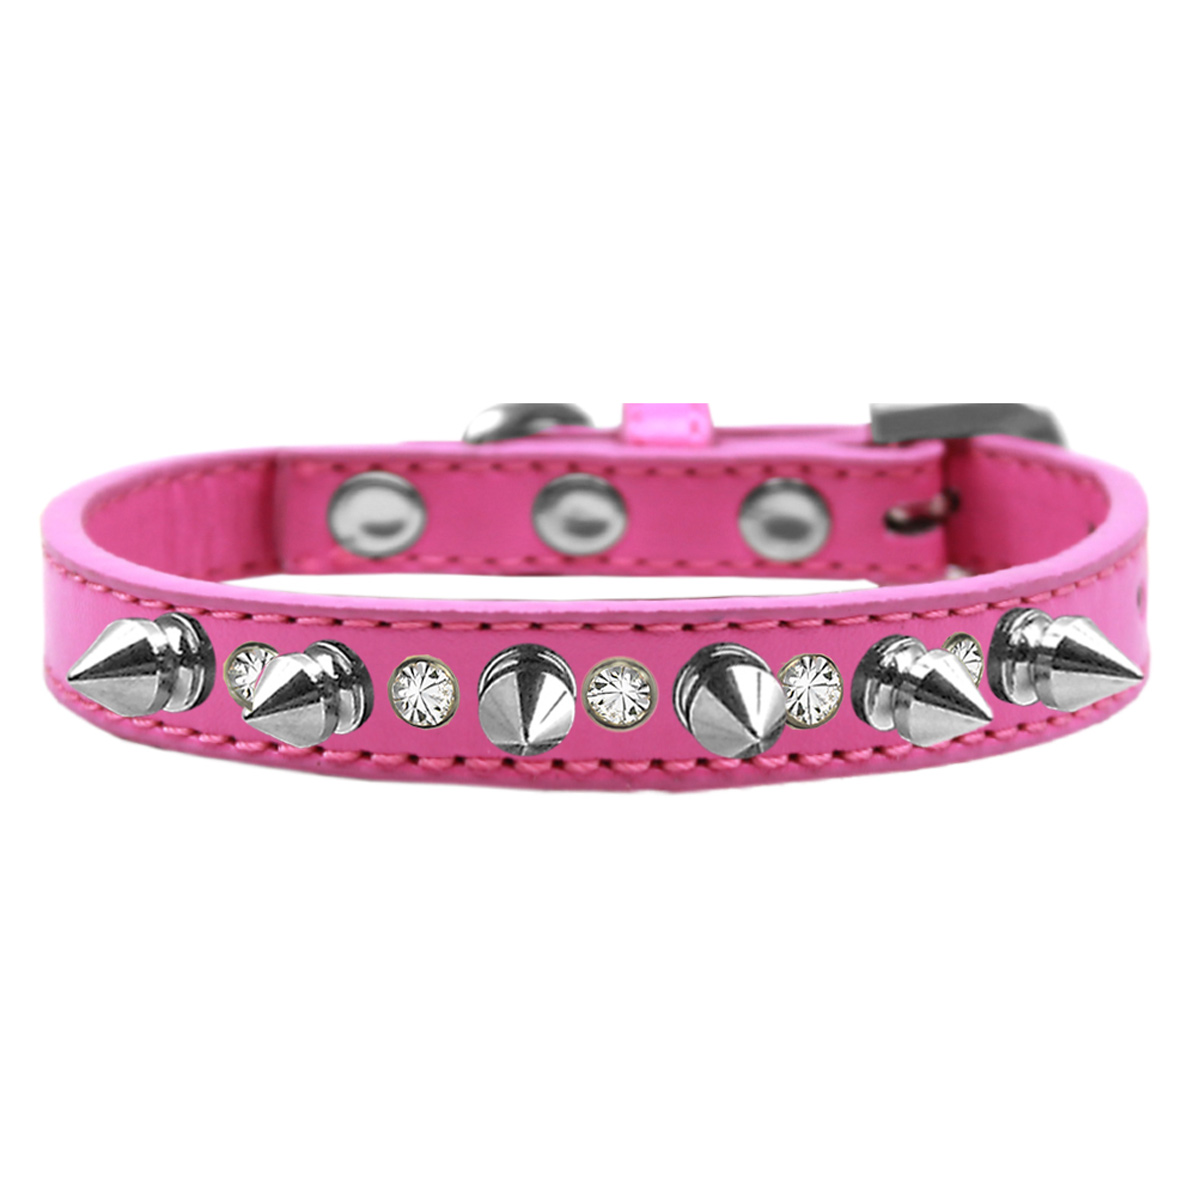 Crystals & Silver Spikes Dog Collar, Bright Pink - Size 10